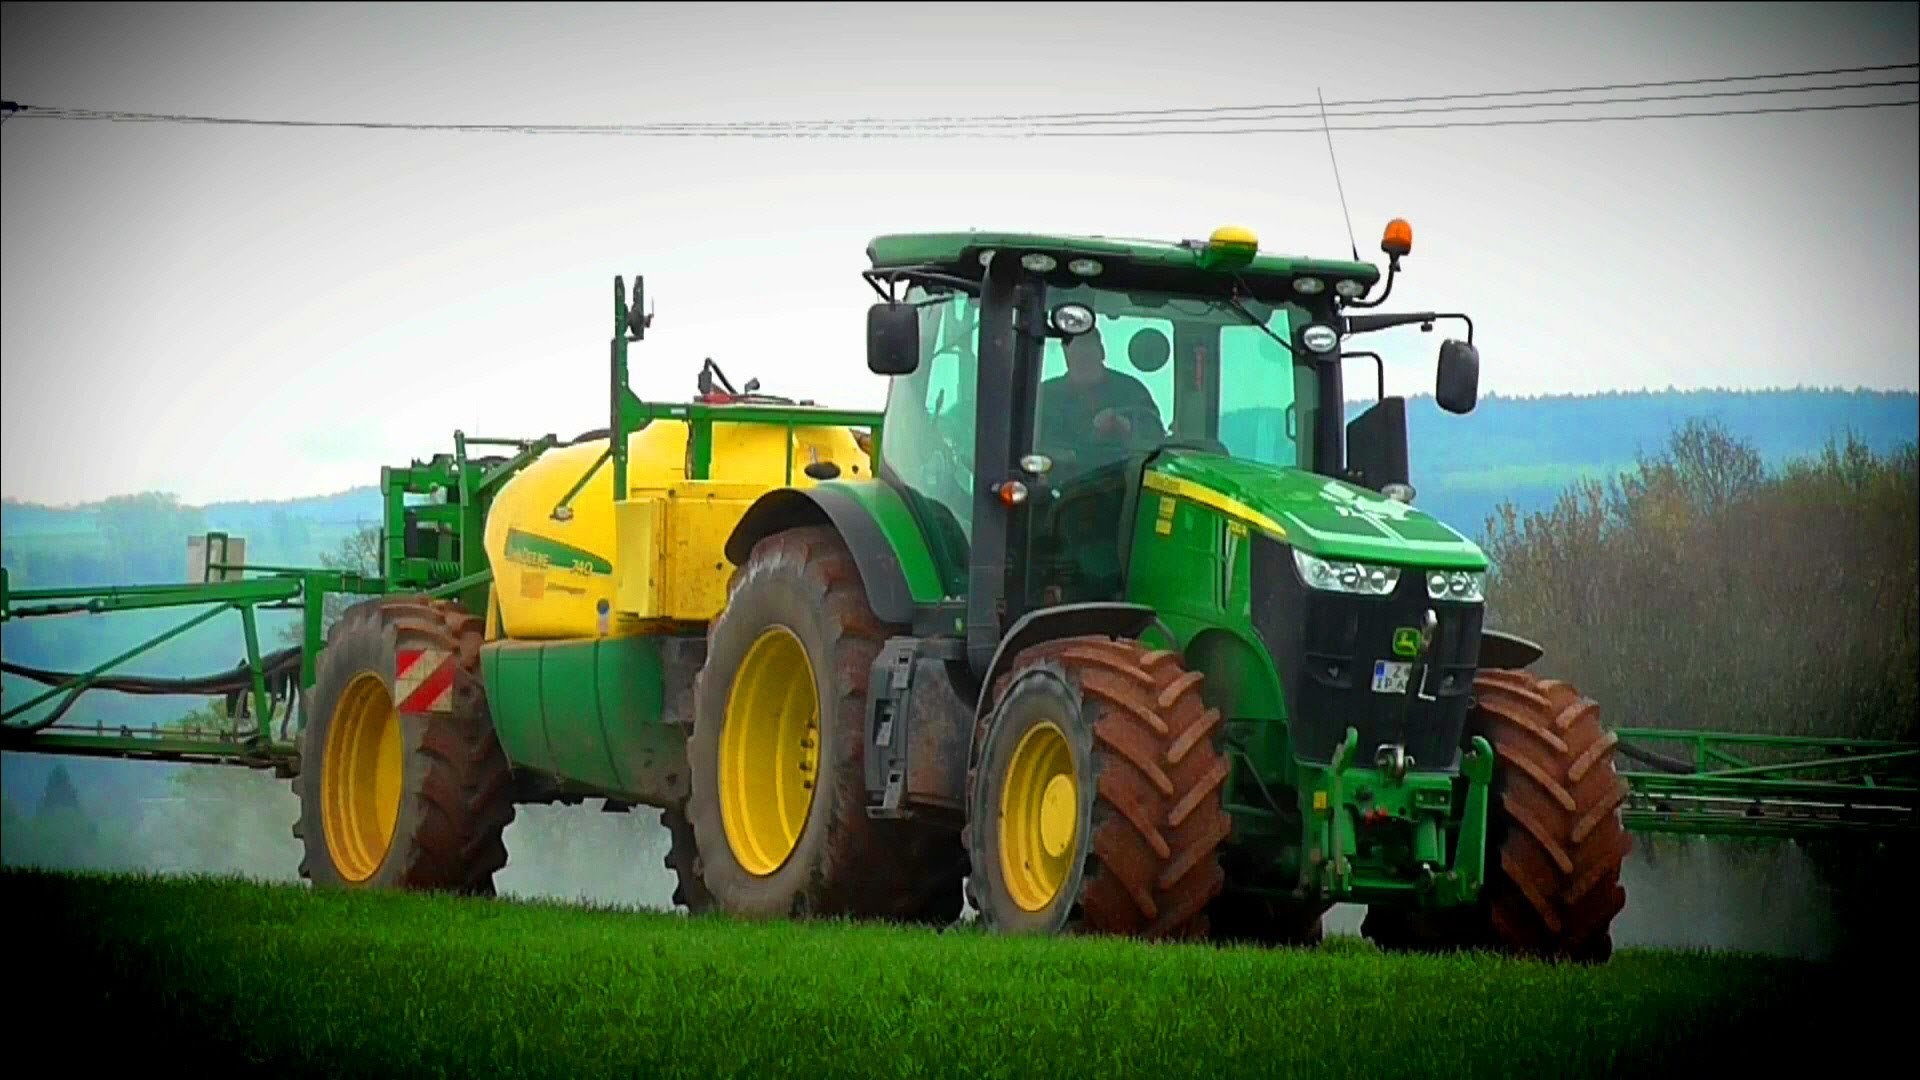 john deere wallpaper hd,land vehicle,tractor,vehicle,agricultural machinery,field